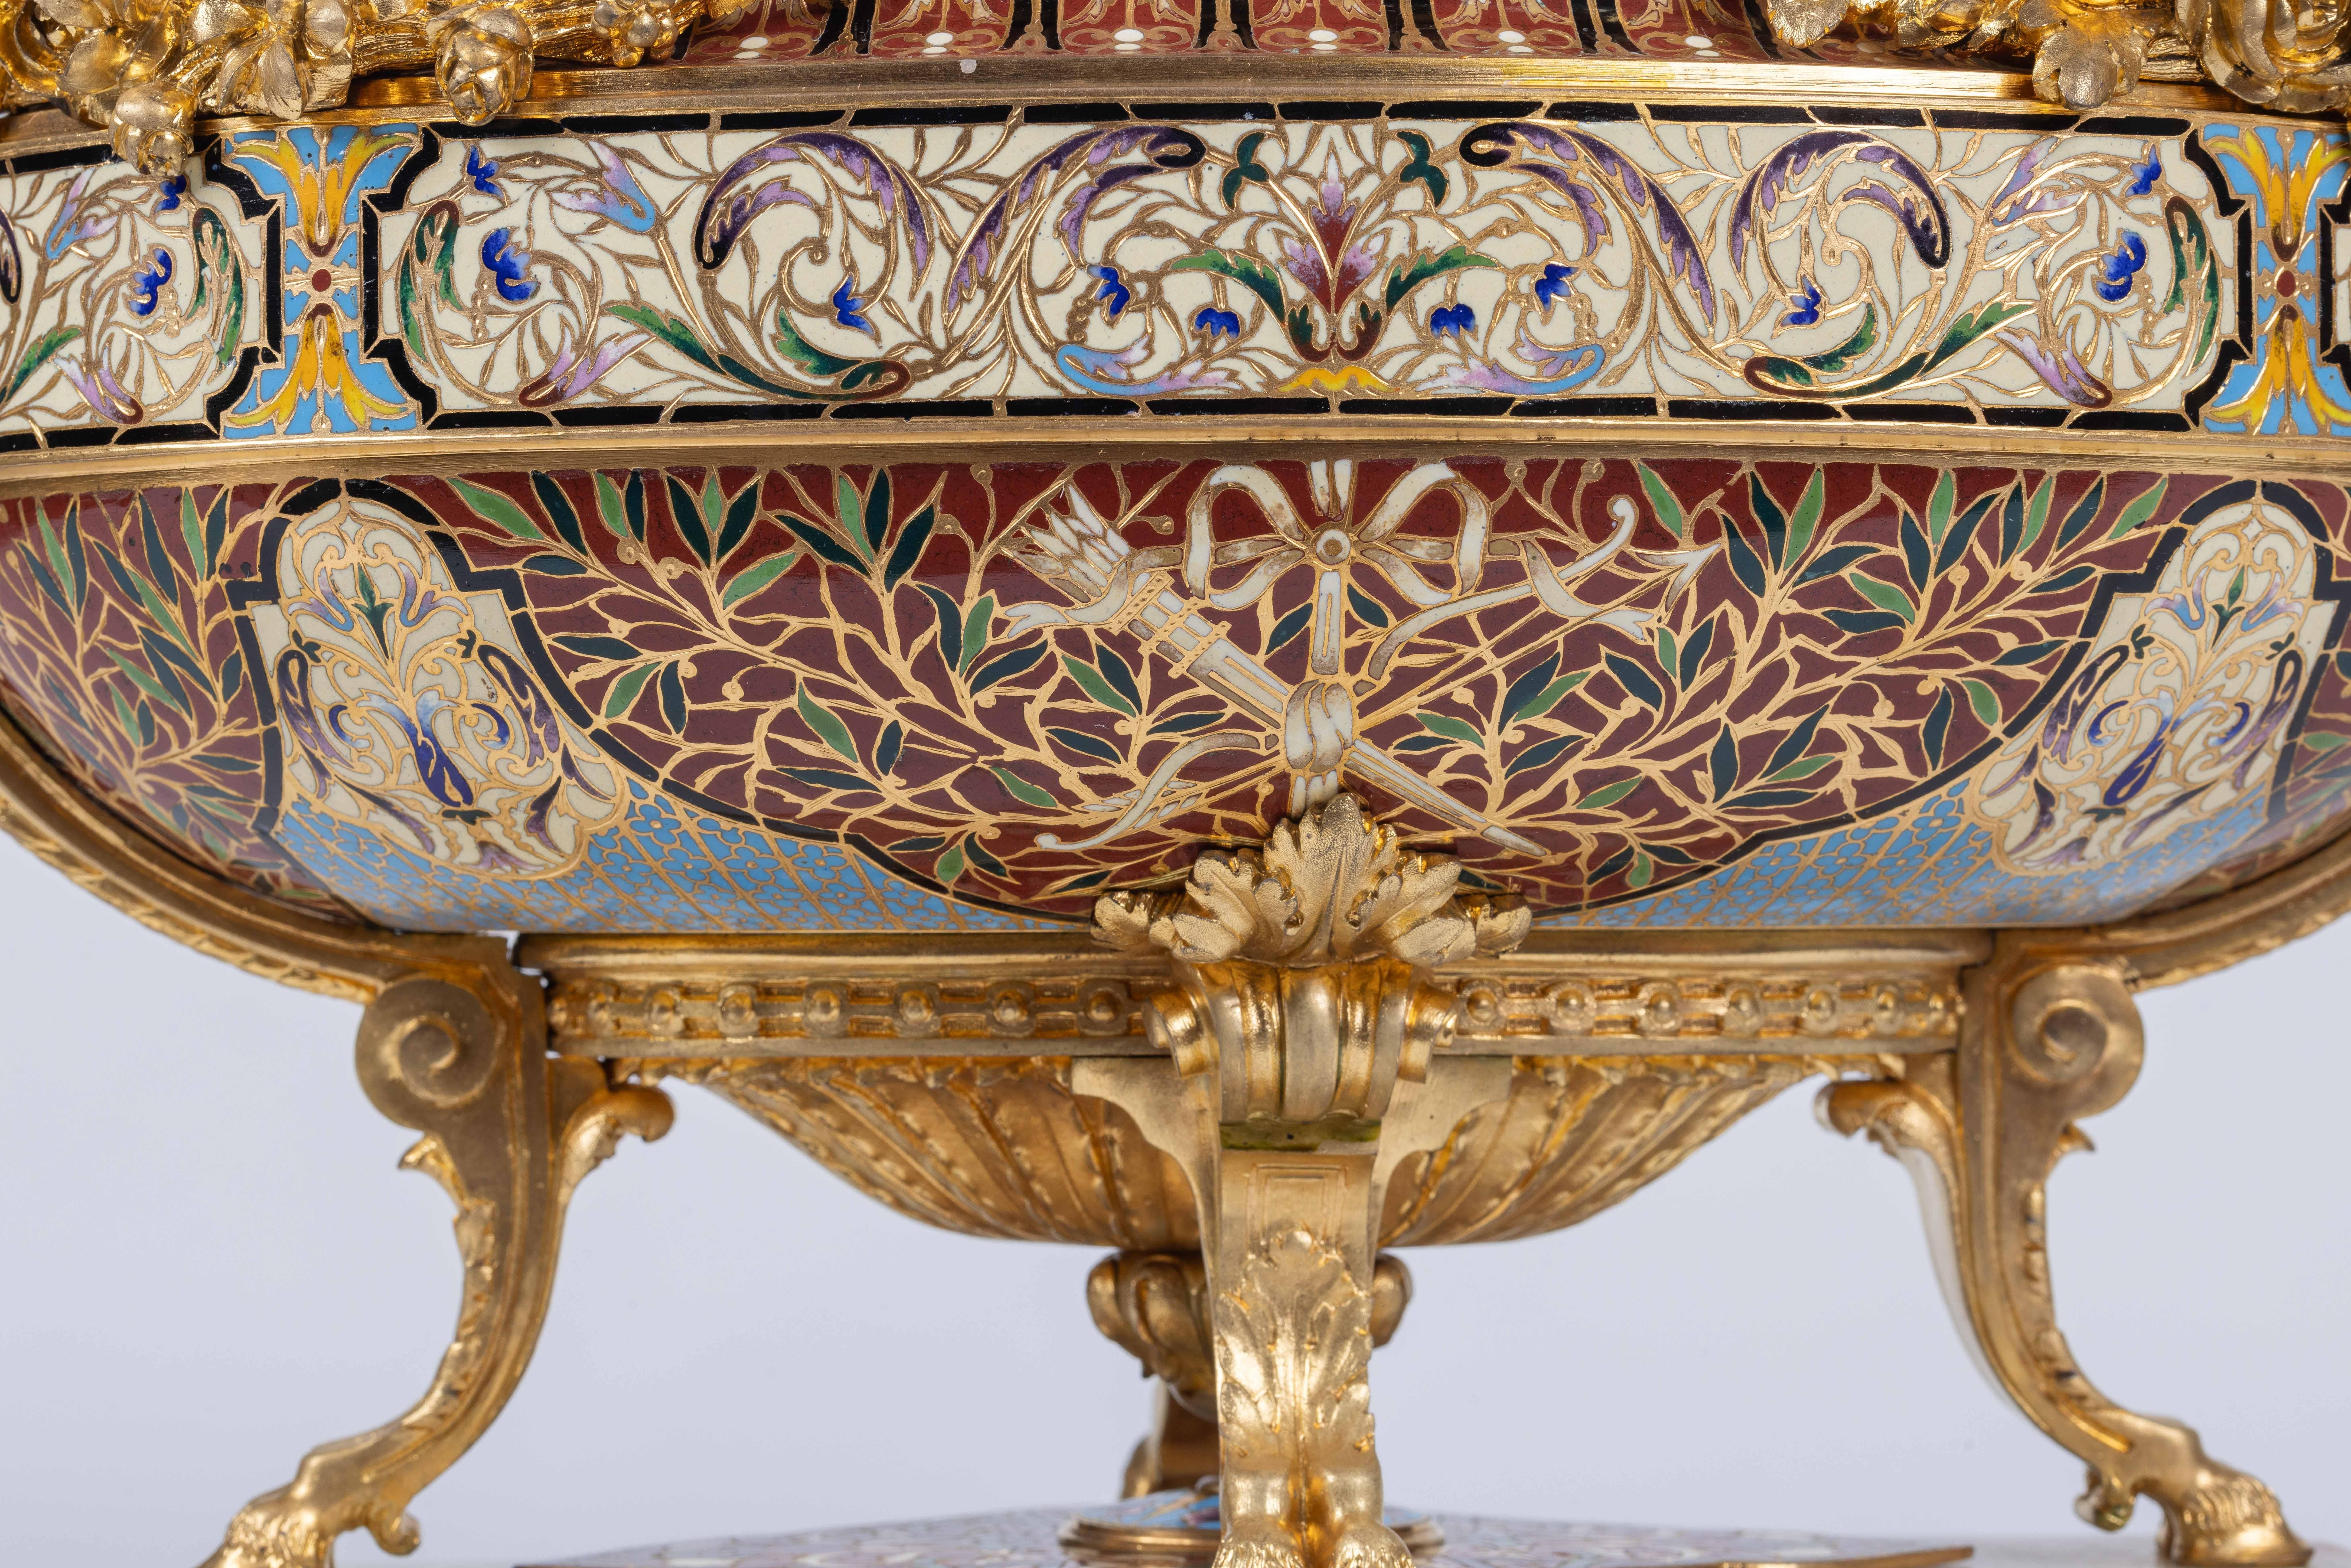 A Fine French Ormolu, Champleve Enamel, and Onyx Figural Centerpiece Jardiniere For Sale 6